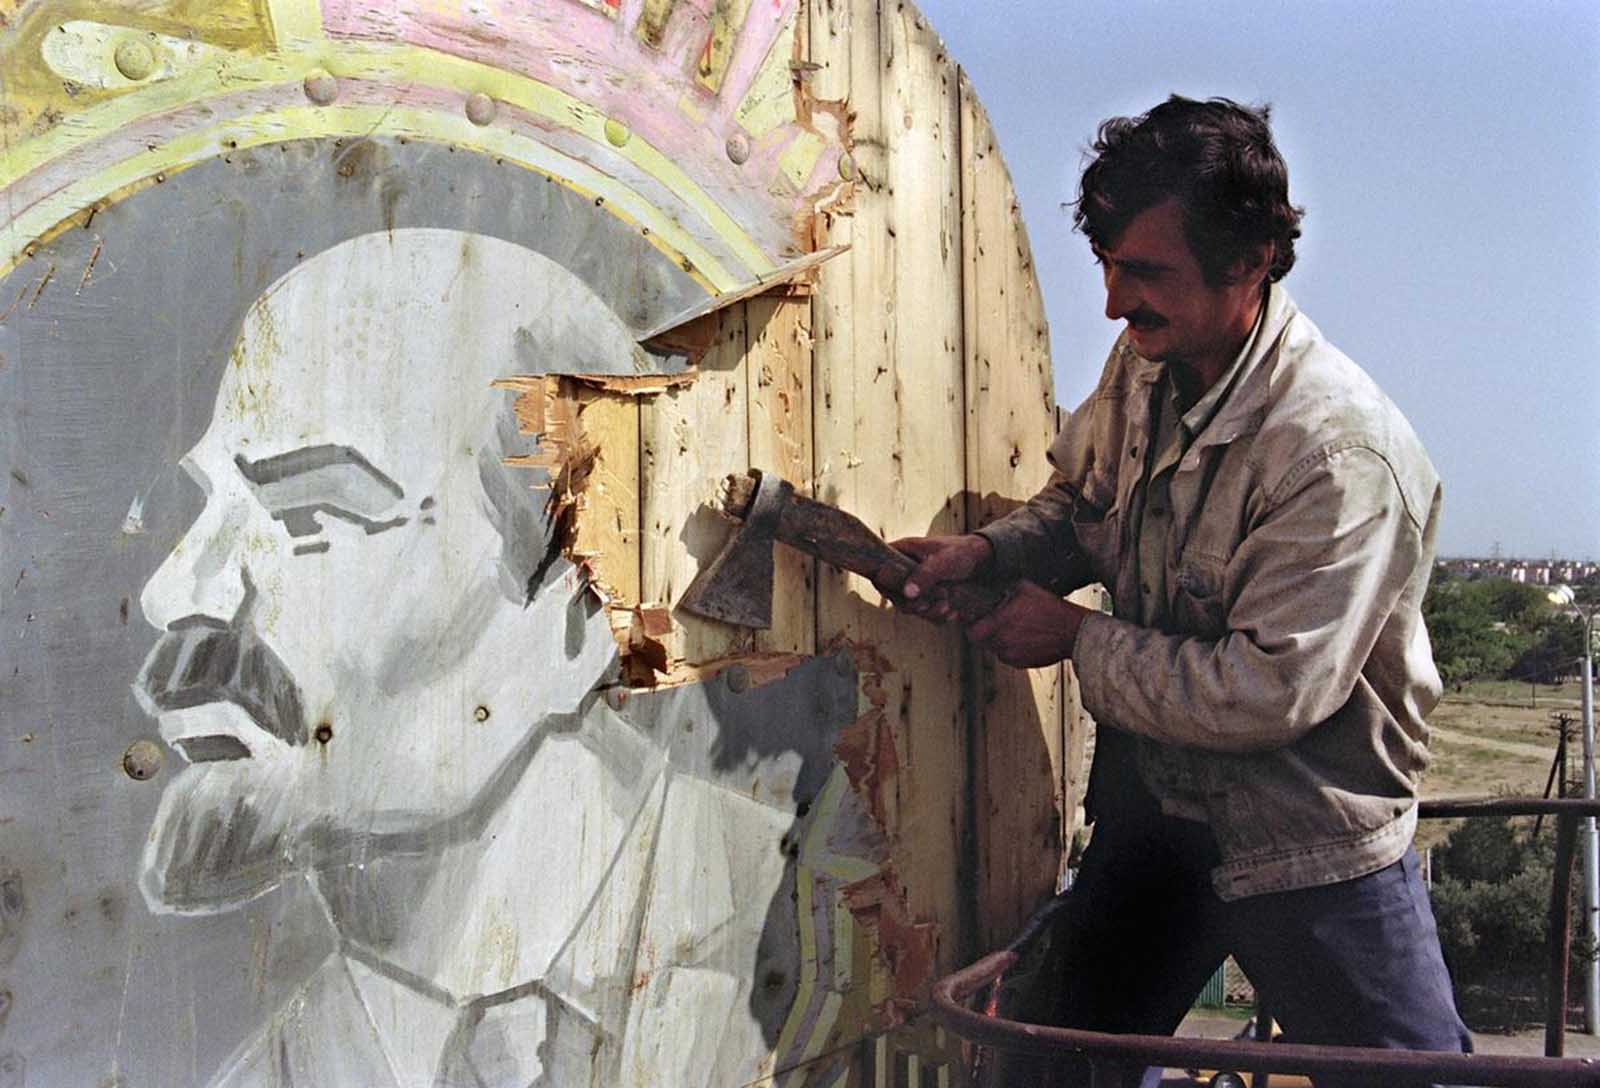 A Baku resident uses an axe to hack apart a placard showing a portrait of Russian Bolshevik revolutionary leader Vladimir Lenin, on September 21, 1991. Azerbaijan was proclaimed a Soviet Socialist Republic by Soviet Union in 1920. The Azeri National Council voted for its declaration of independence in 1991.